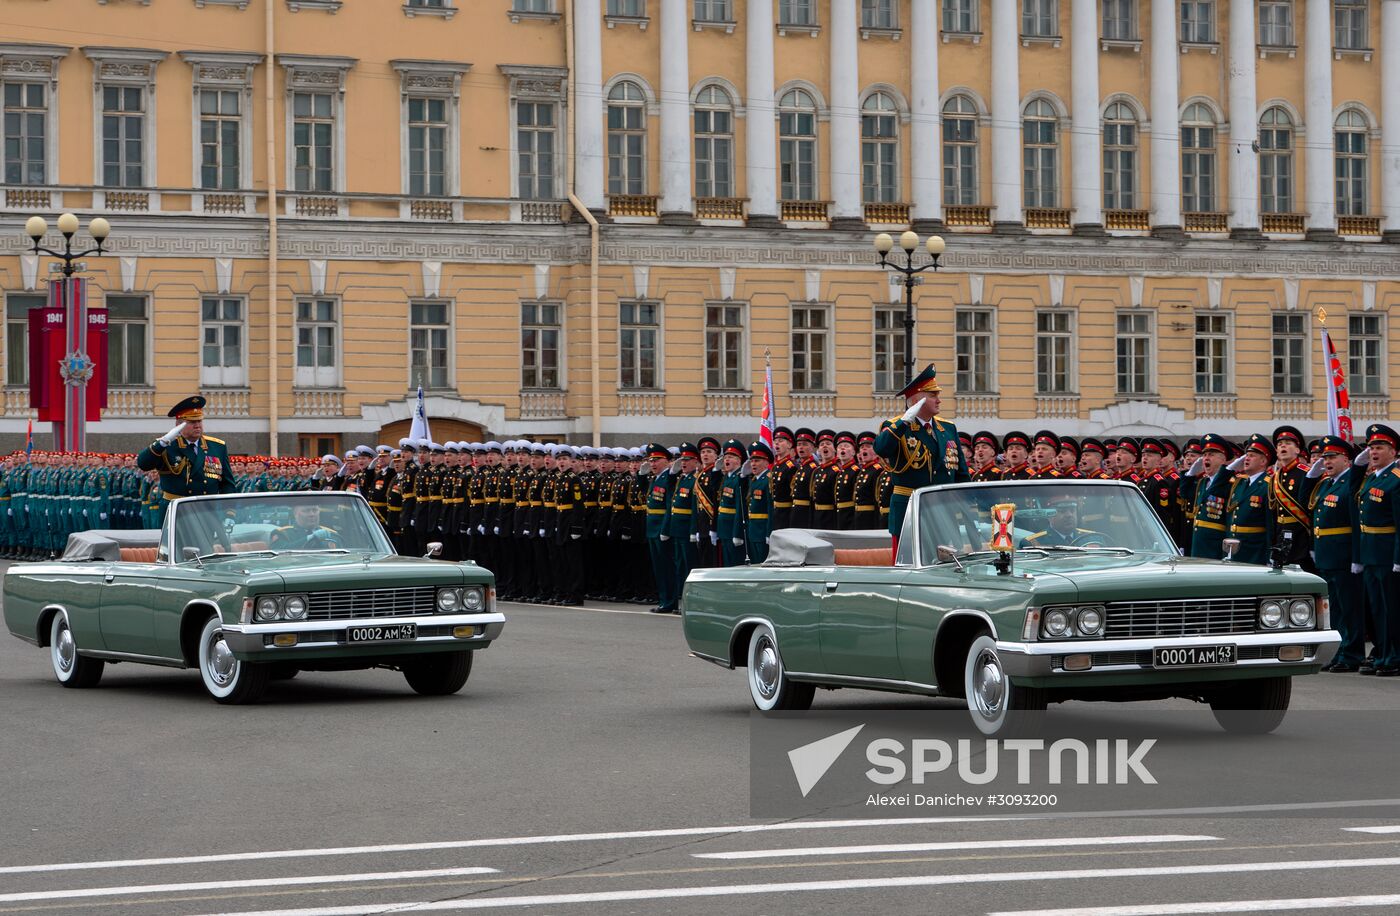 Final rehearsal of Victory Day parade in St. Petersburg